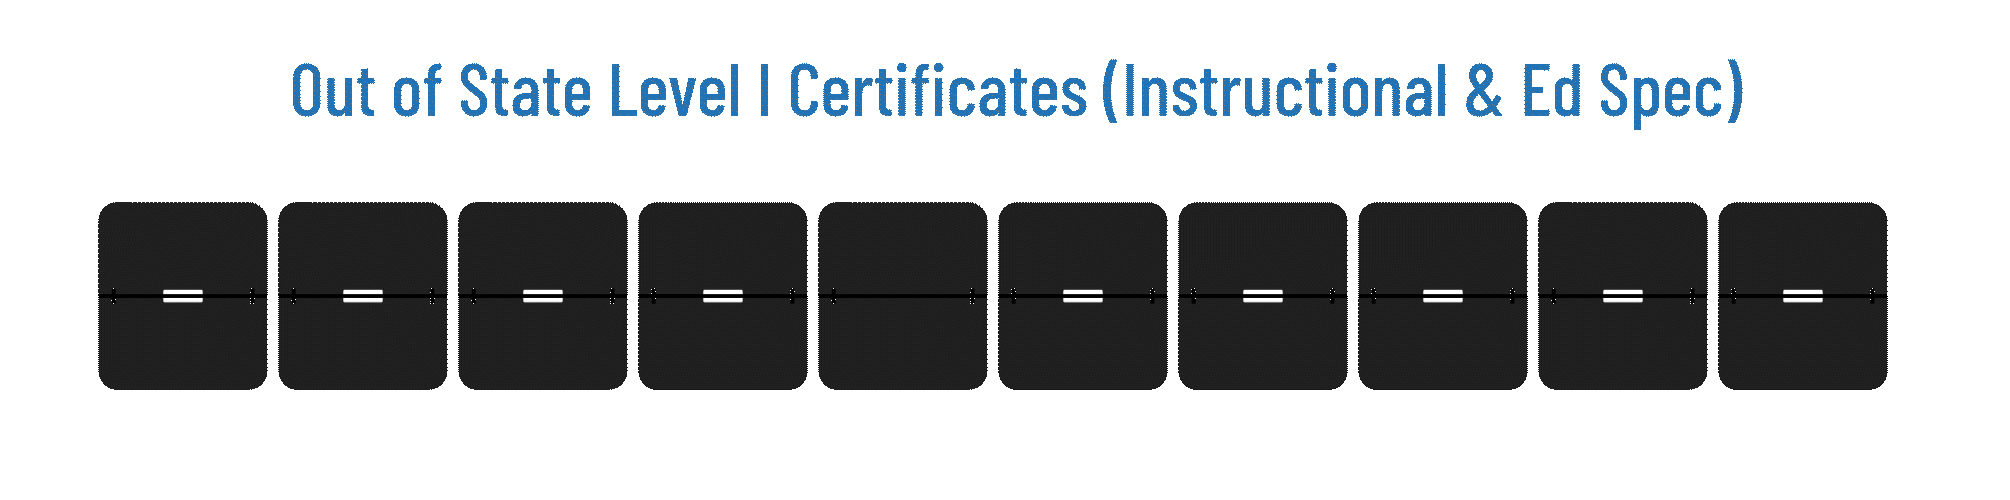 Out of State Level I Certificates (Instructional & Ed Spec) - 3-4 Weeks